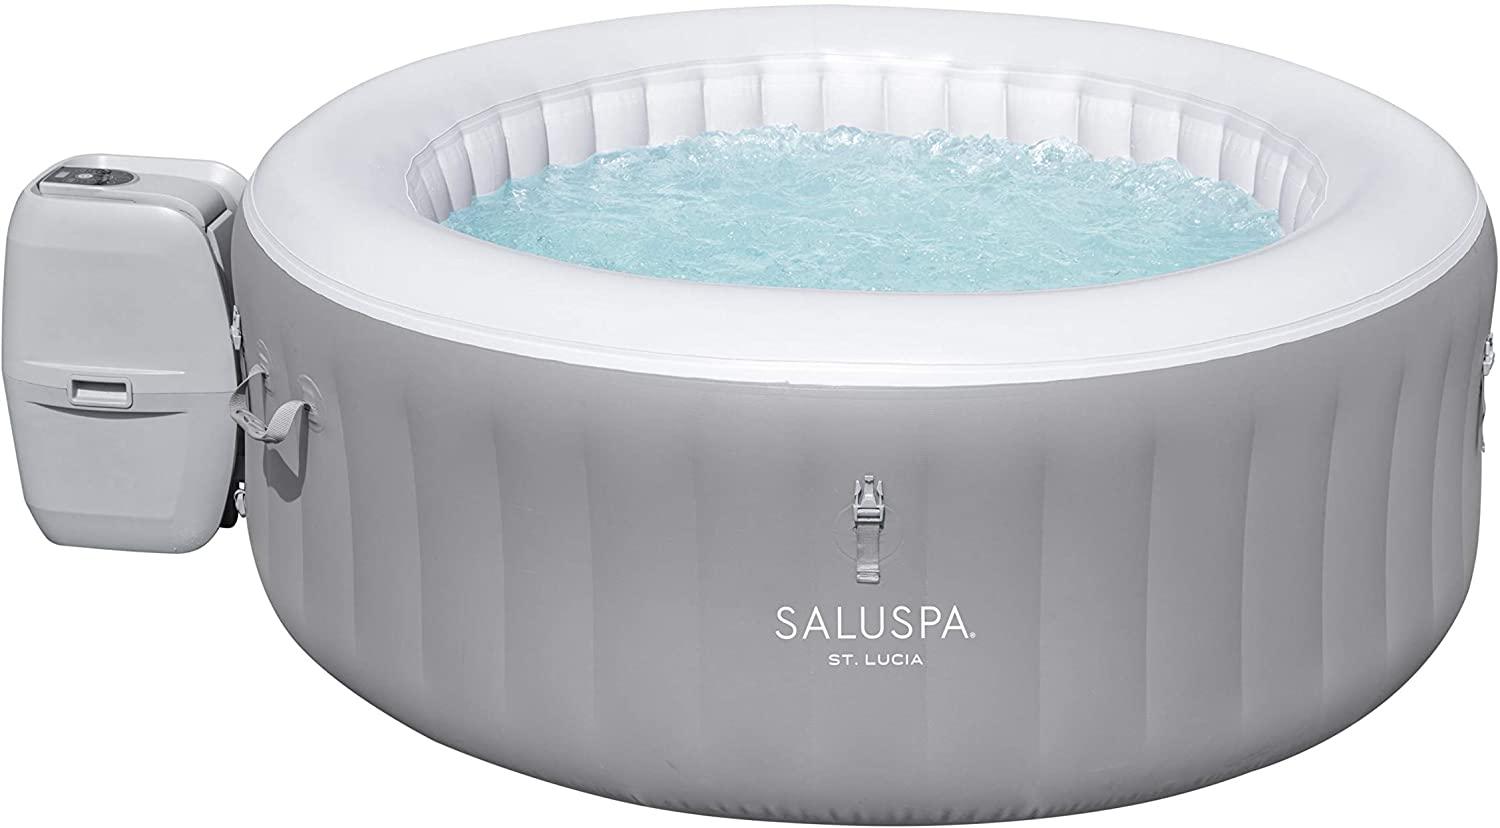 Bestway 67 x 26 St Lucia SaluSpa AirJet Hot Tub Spa for $310.79 Shipped